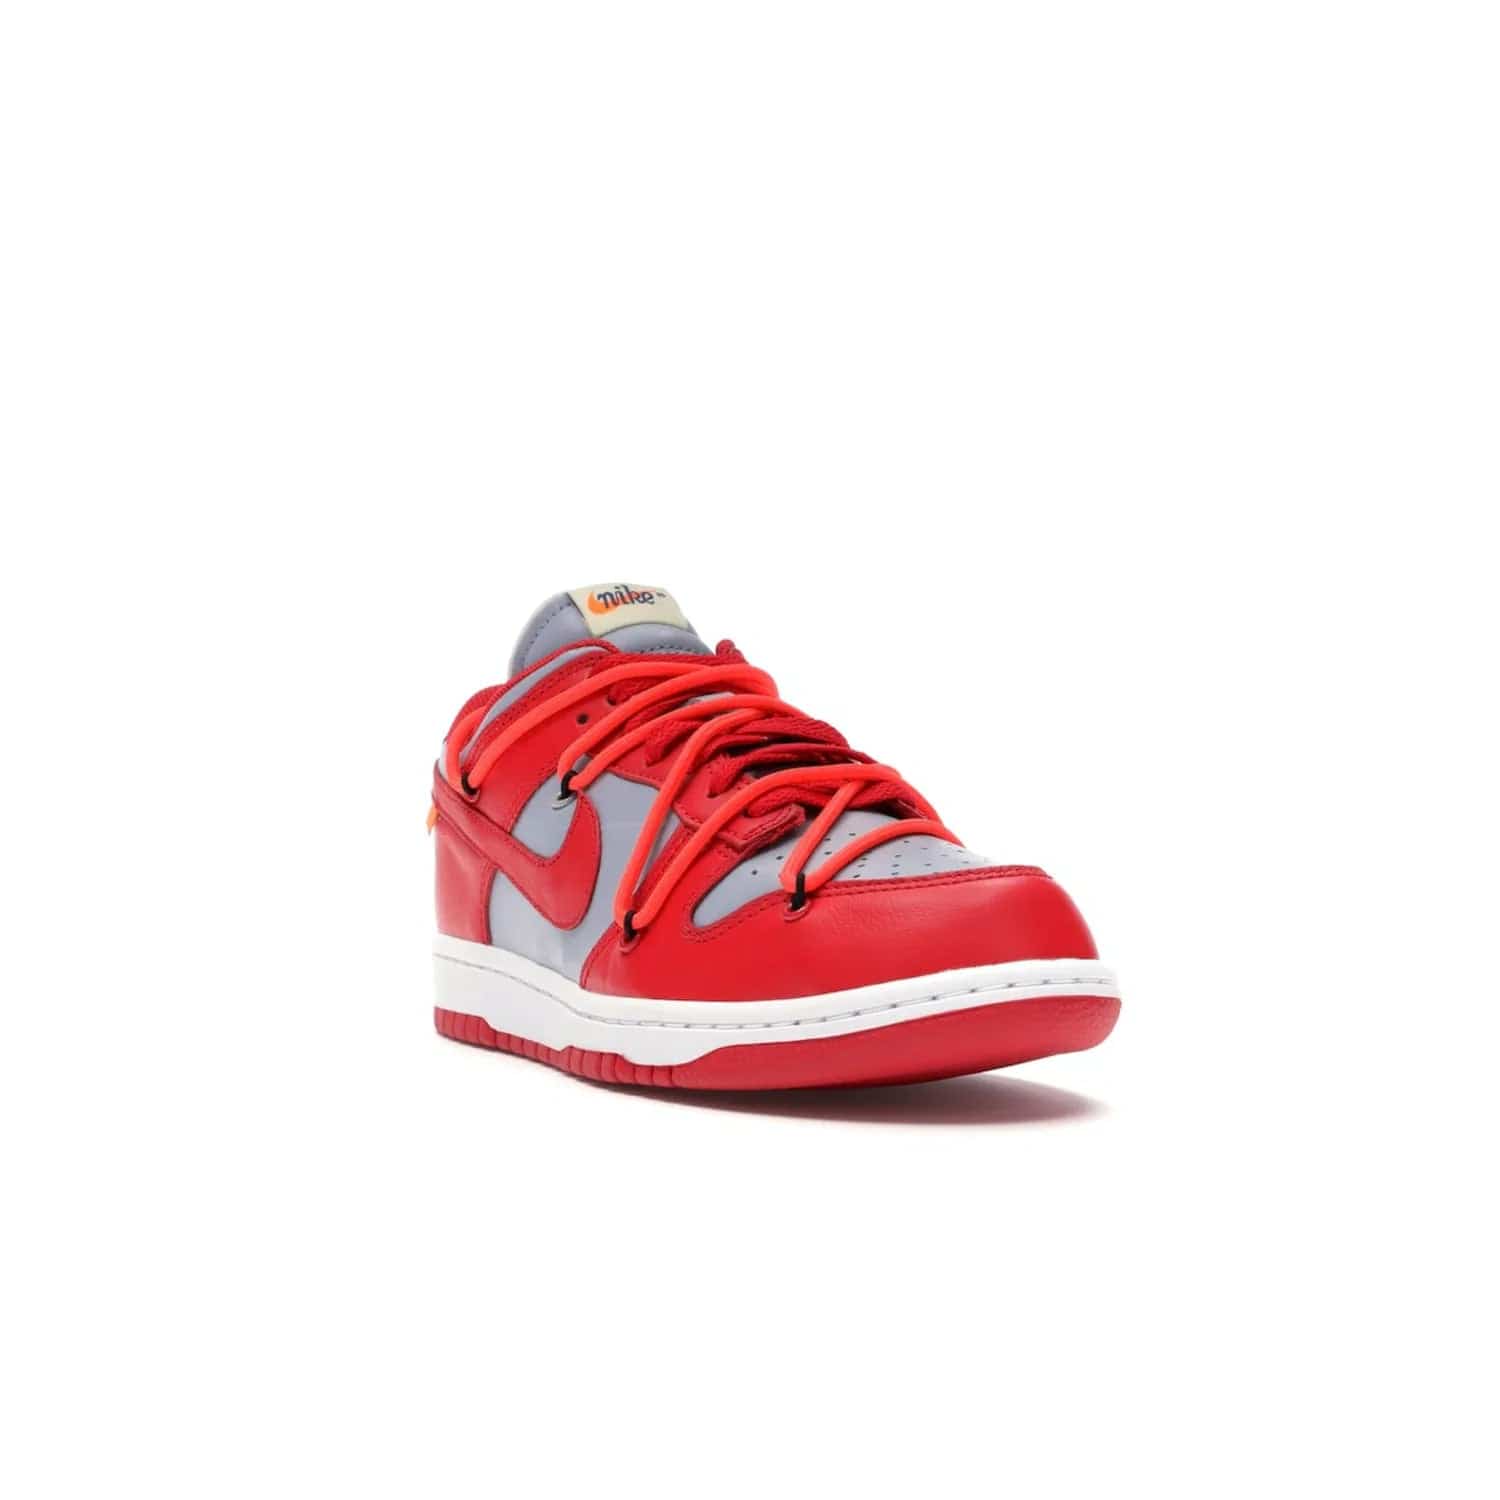 Nike Dunk Low Off-White University Red - Image 7 - Only at www.BallersClubKickz.com - The Nike Dunk Low Off-White University Red offers tribute to classic Nike Basketball silhouettes. Features include wolf grey leather, university red overlays, zip-ties, and Off-White text. Perfect for any sneaker fan, these stylish sneakers released in December of 2019.